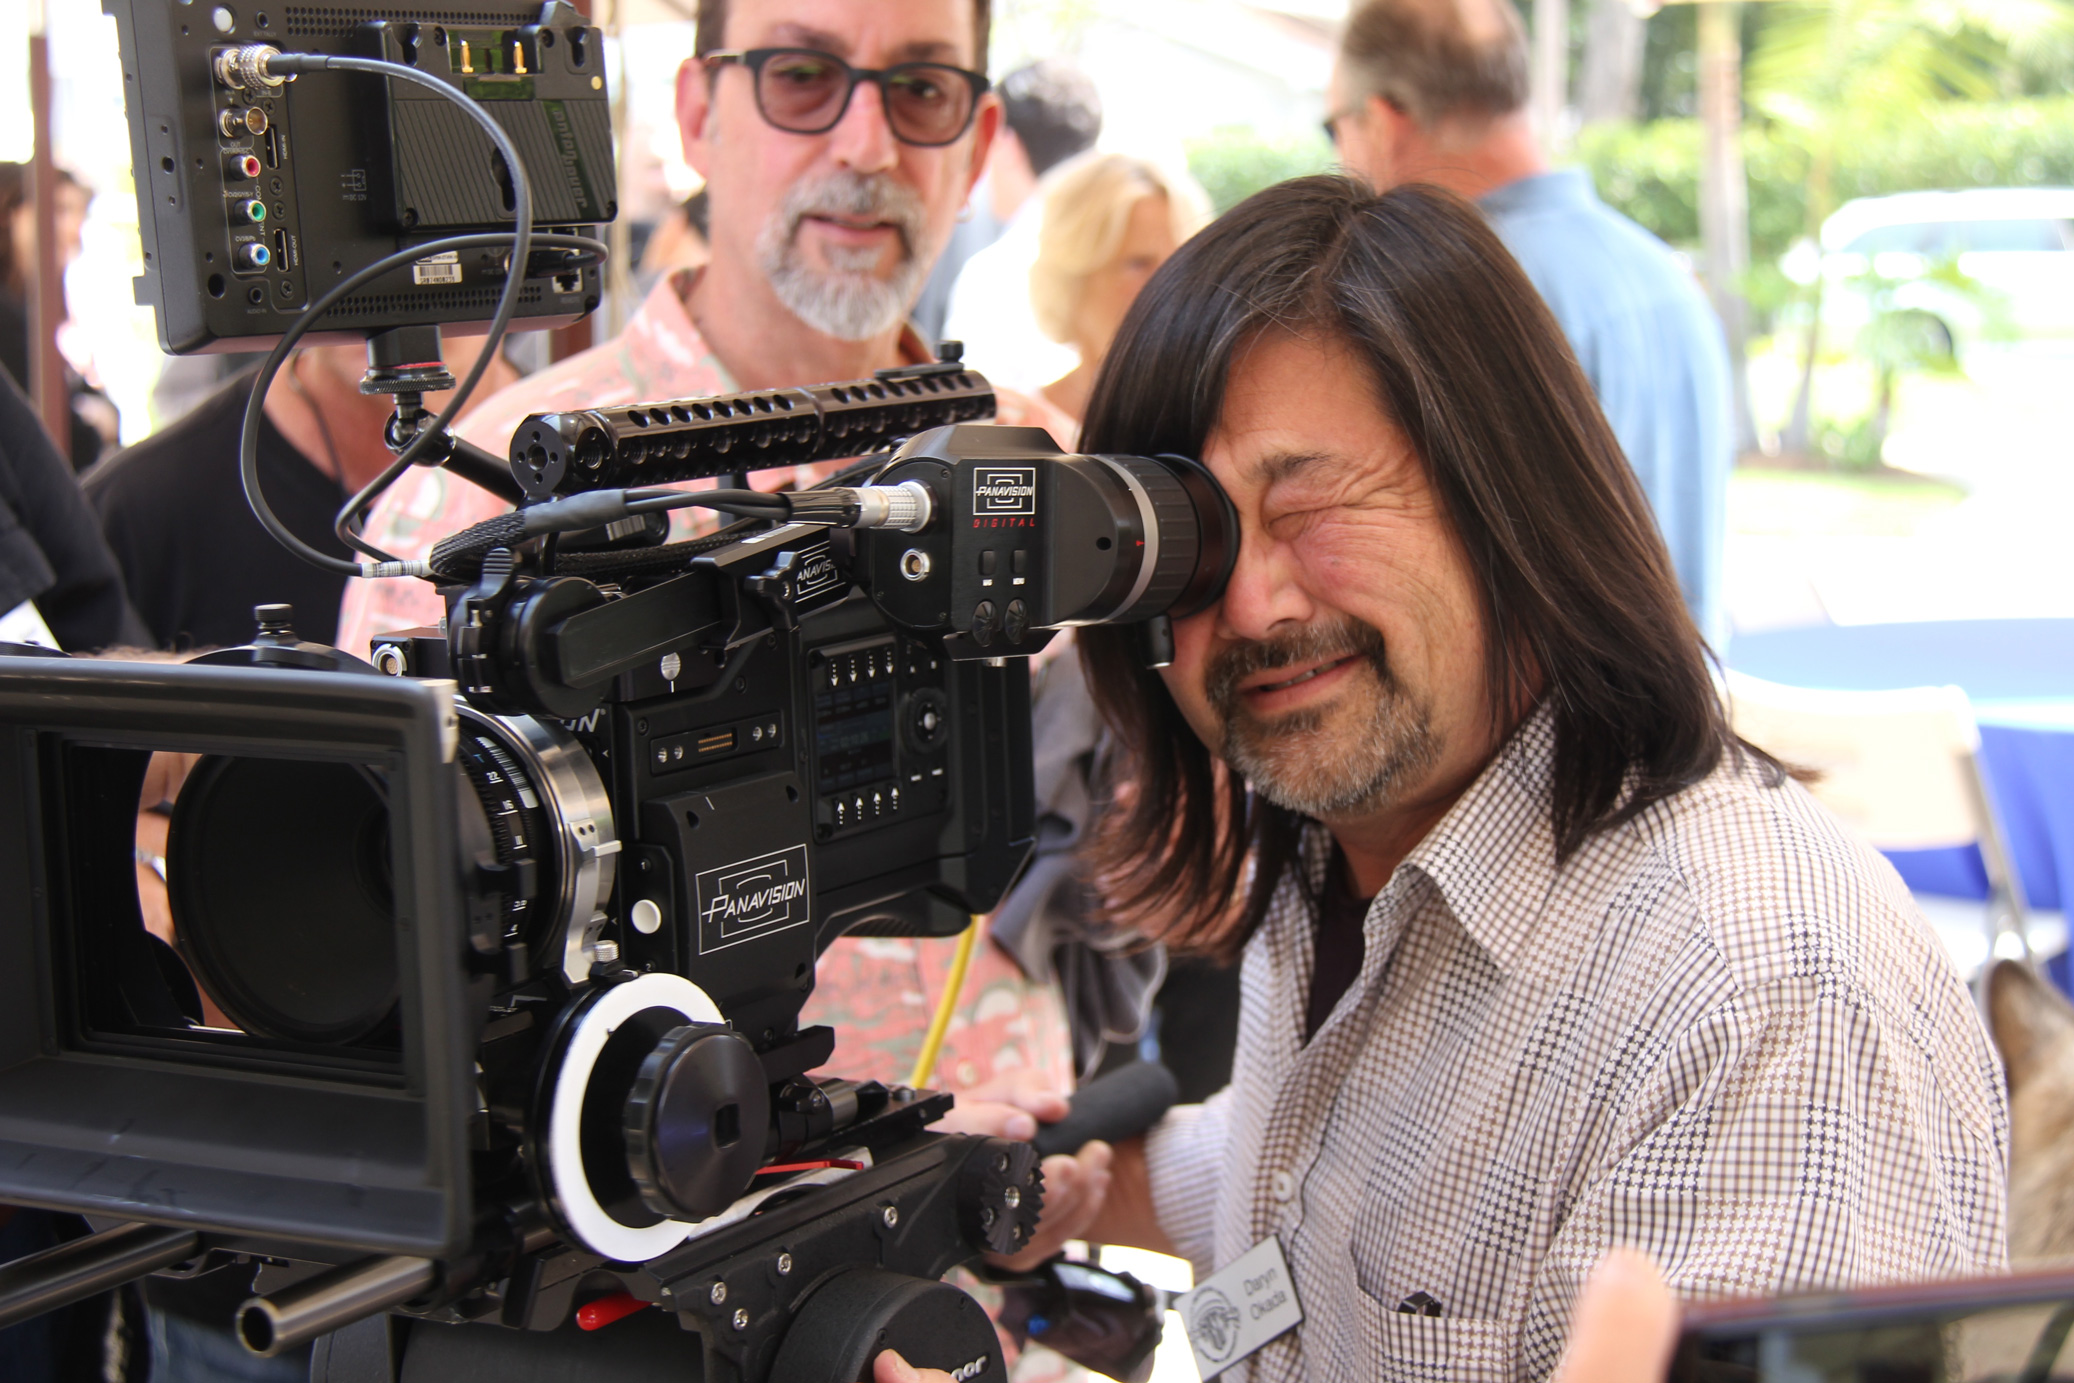 ASC members Daryn Okada (at eyepiece) and James L. Carter examine a Panavision DXL at the ASC Clubhouse (image: ©ASC 2016).